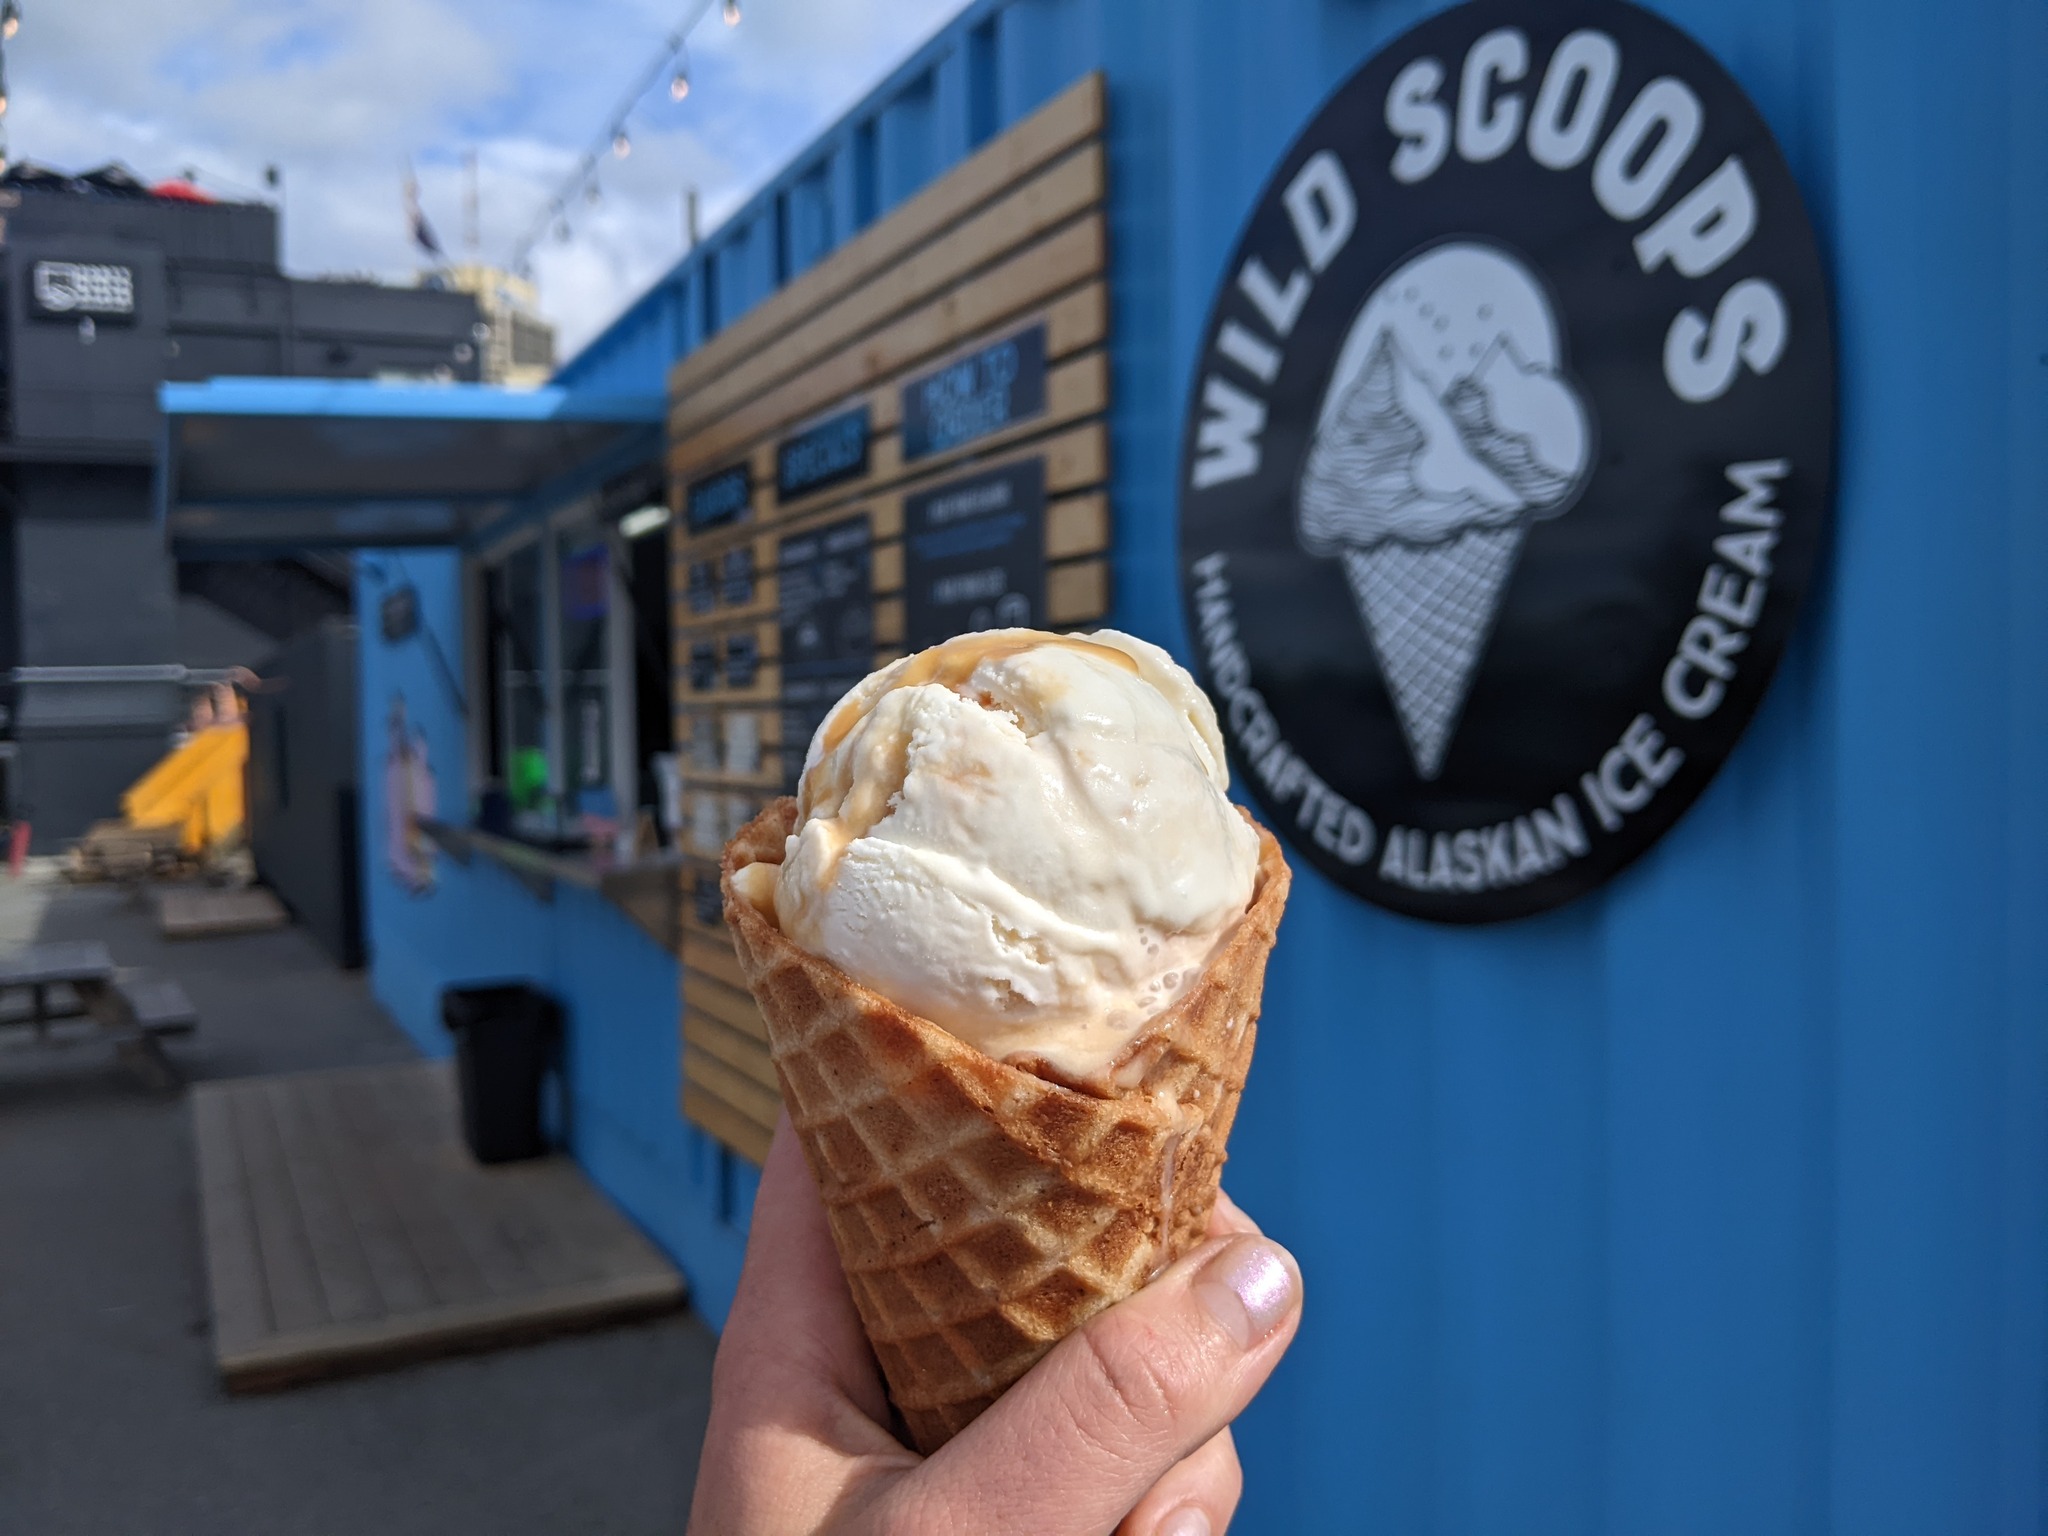 An image of a refreshing ice cream cone from Wild Scoops in front of their new location in the 49th State Brewery Beer Garden